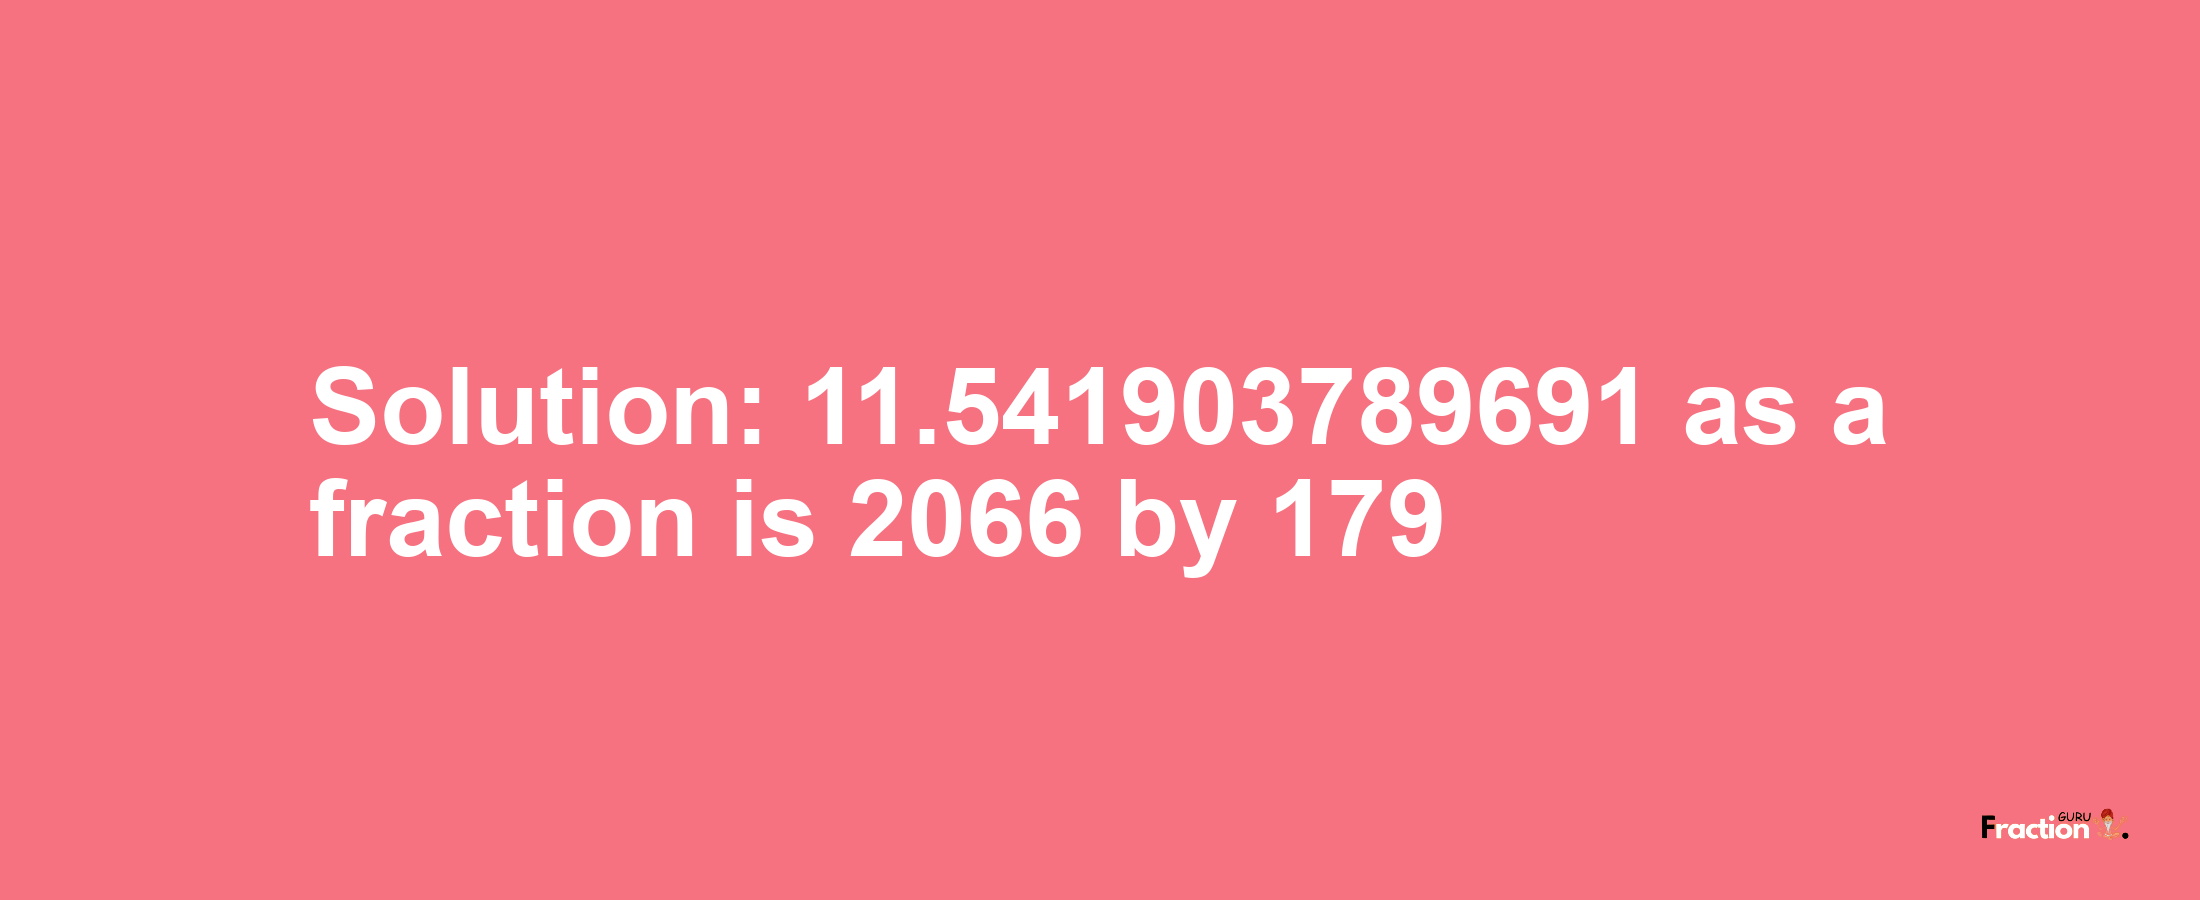 Solution:11.541903789691 as a fraction is 2066/179